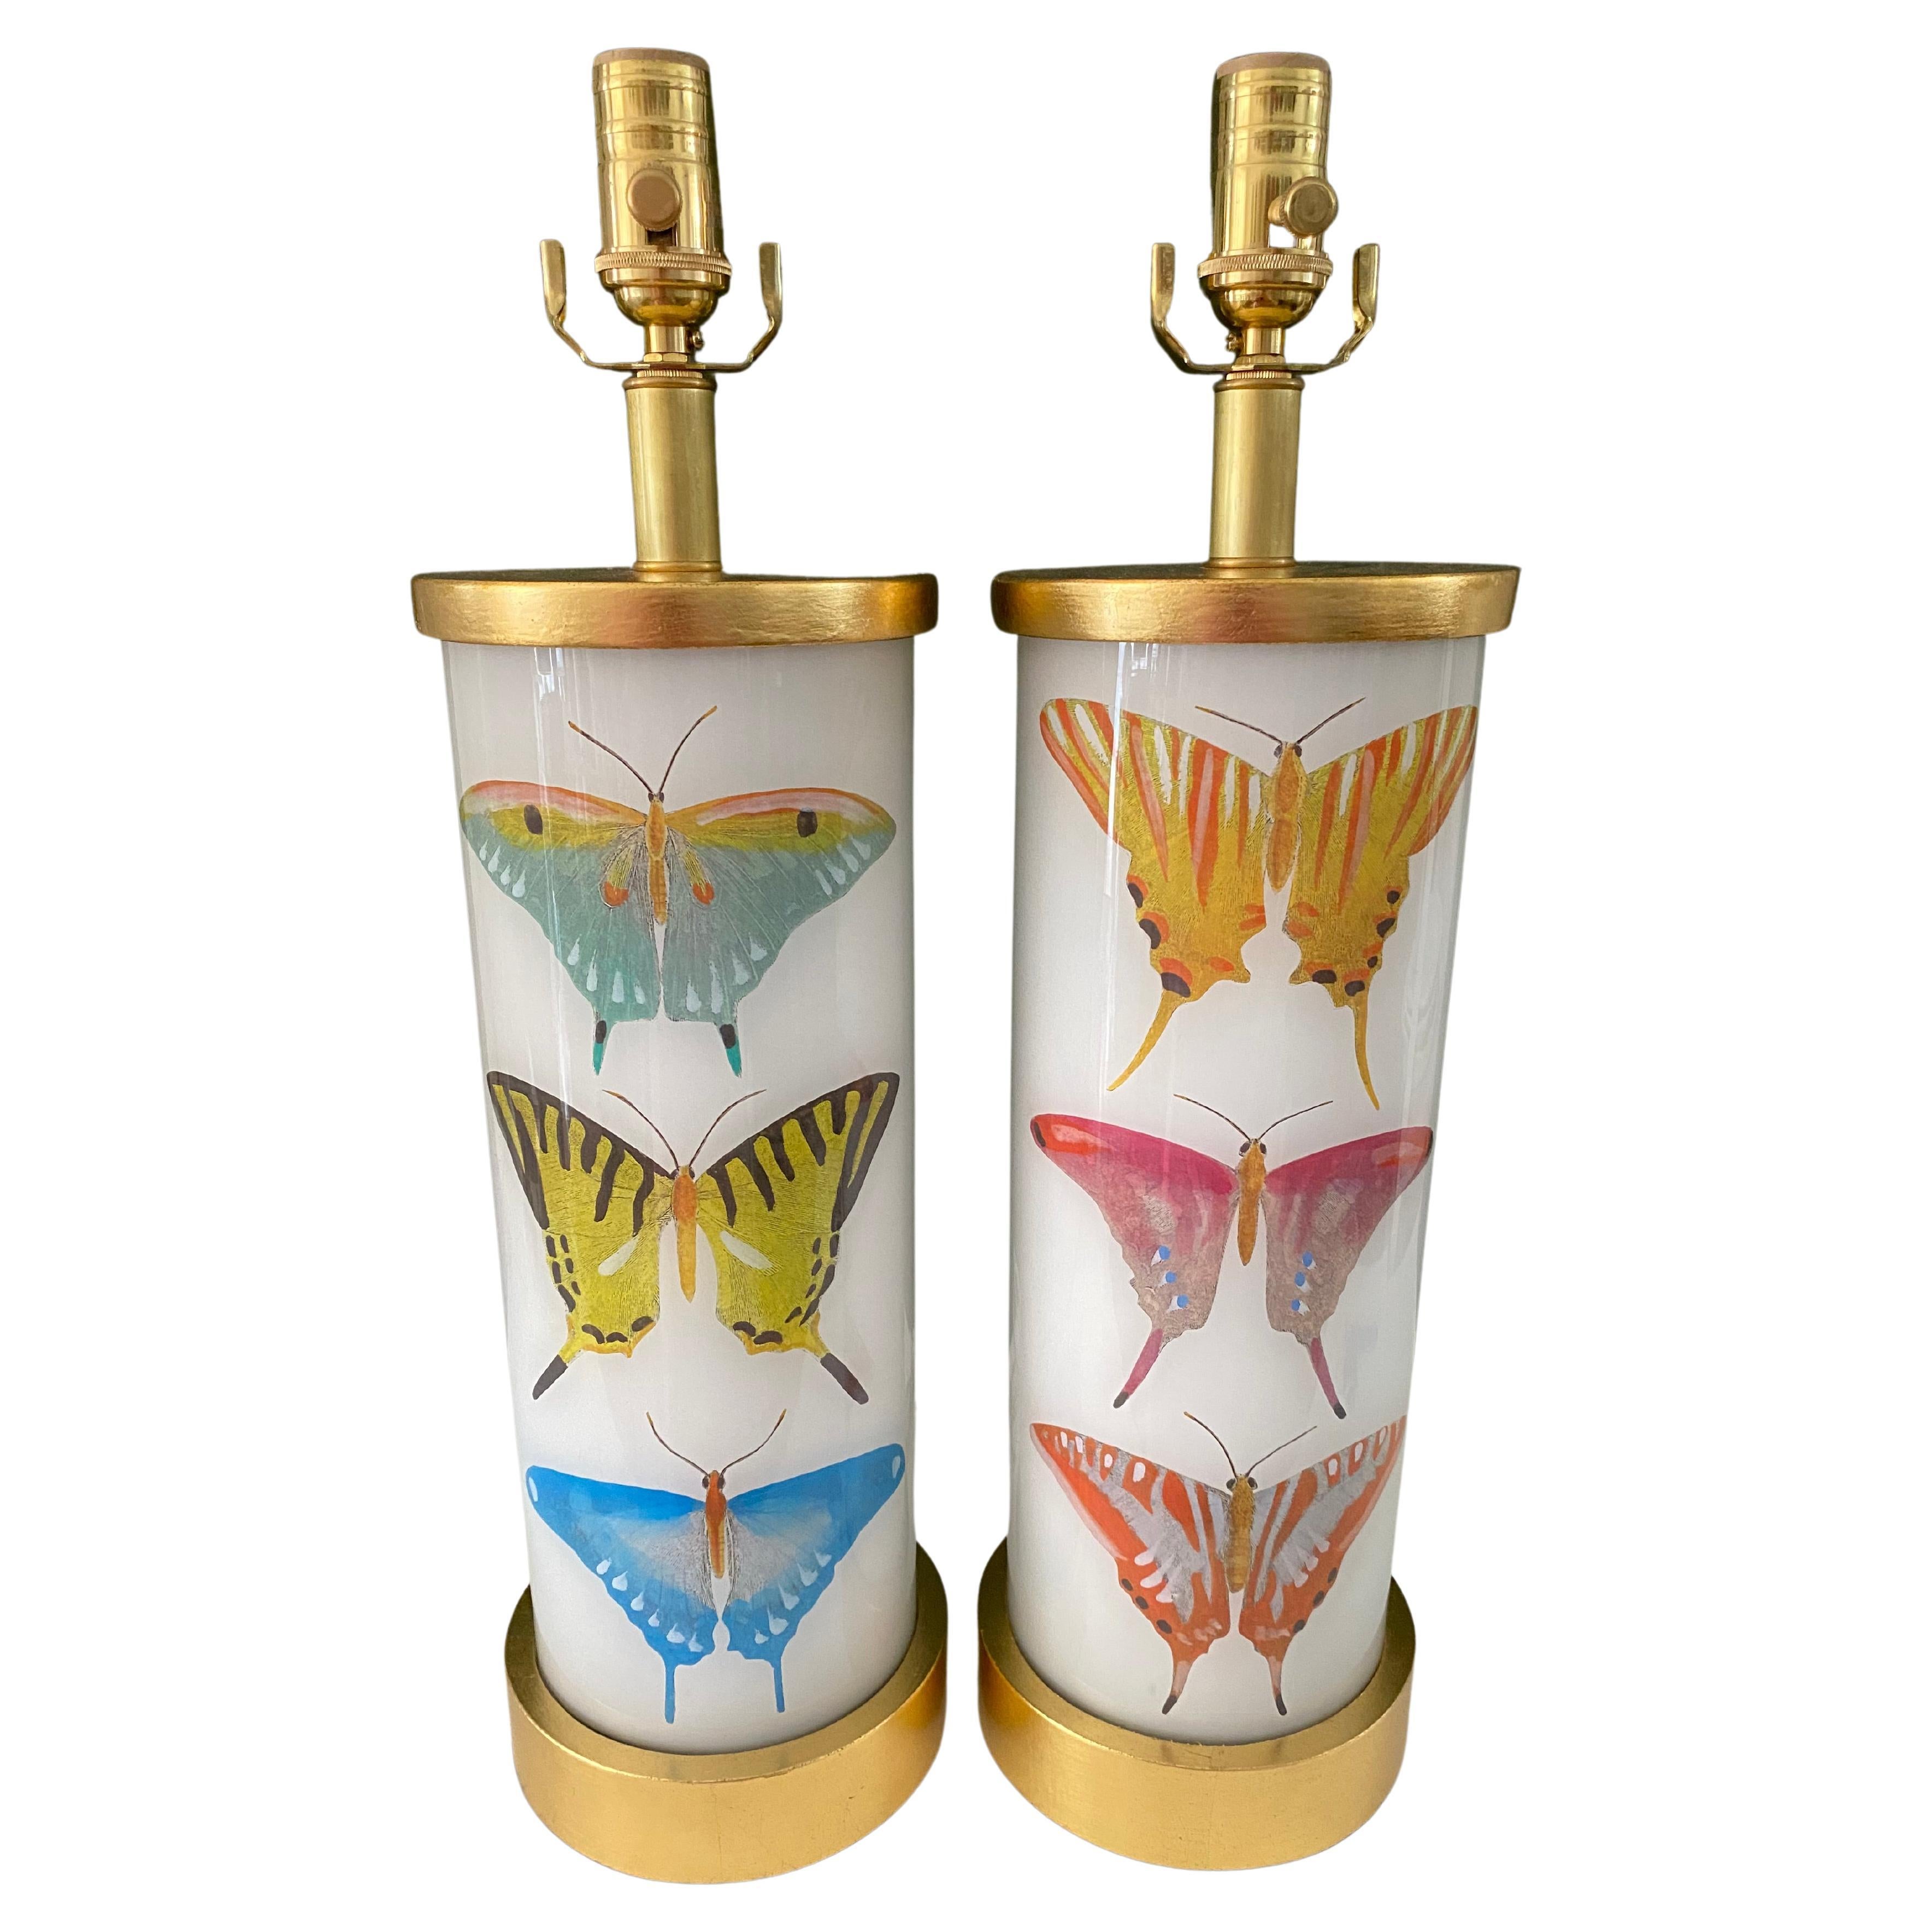 Liz Marsh Designs Pair of Decoupage Butterfly Study Lamps For Sale